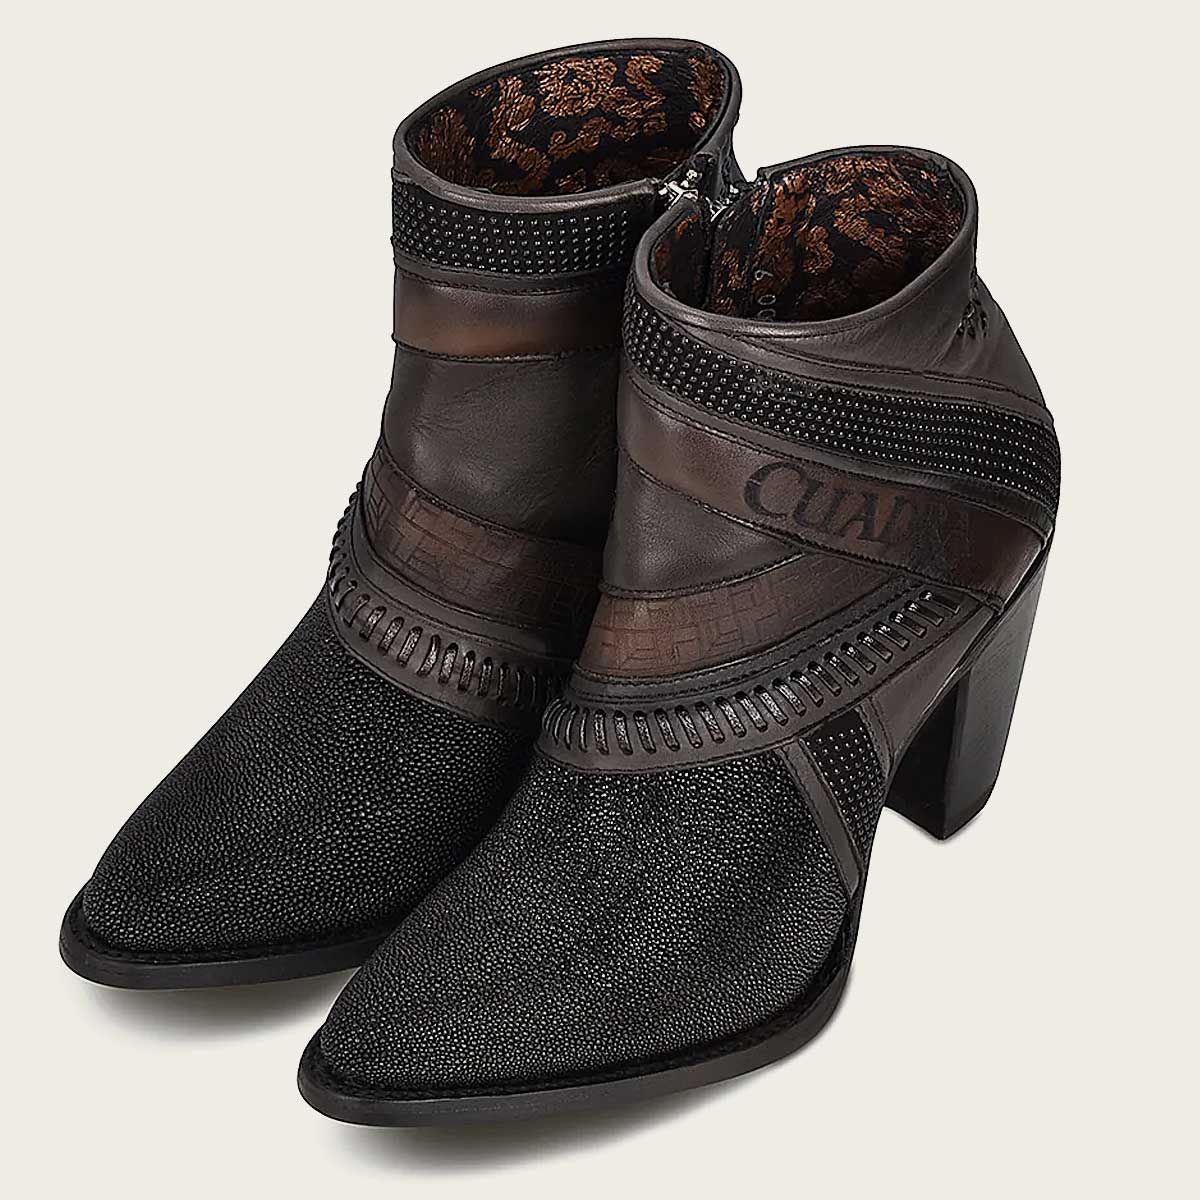 Black boots in stingray leather and premium bovine leather.